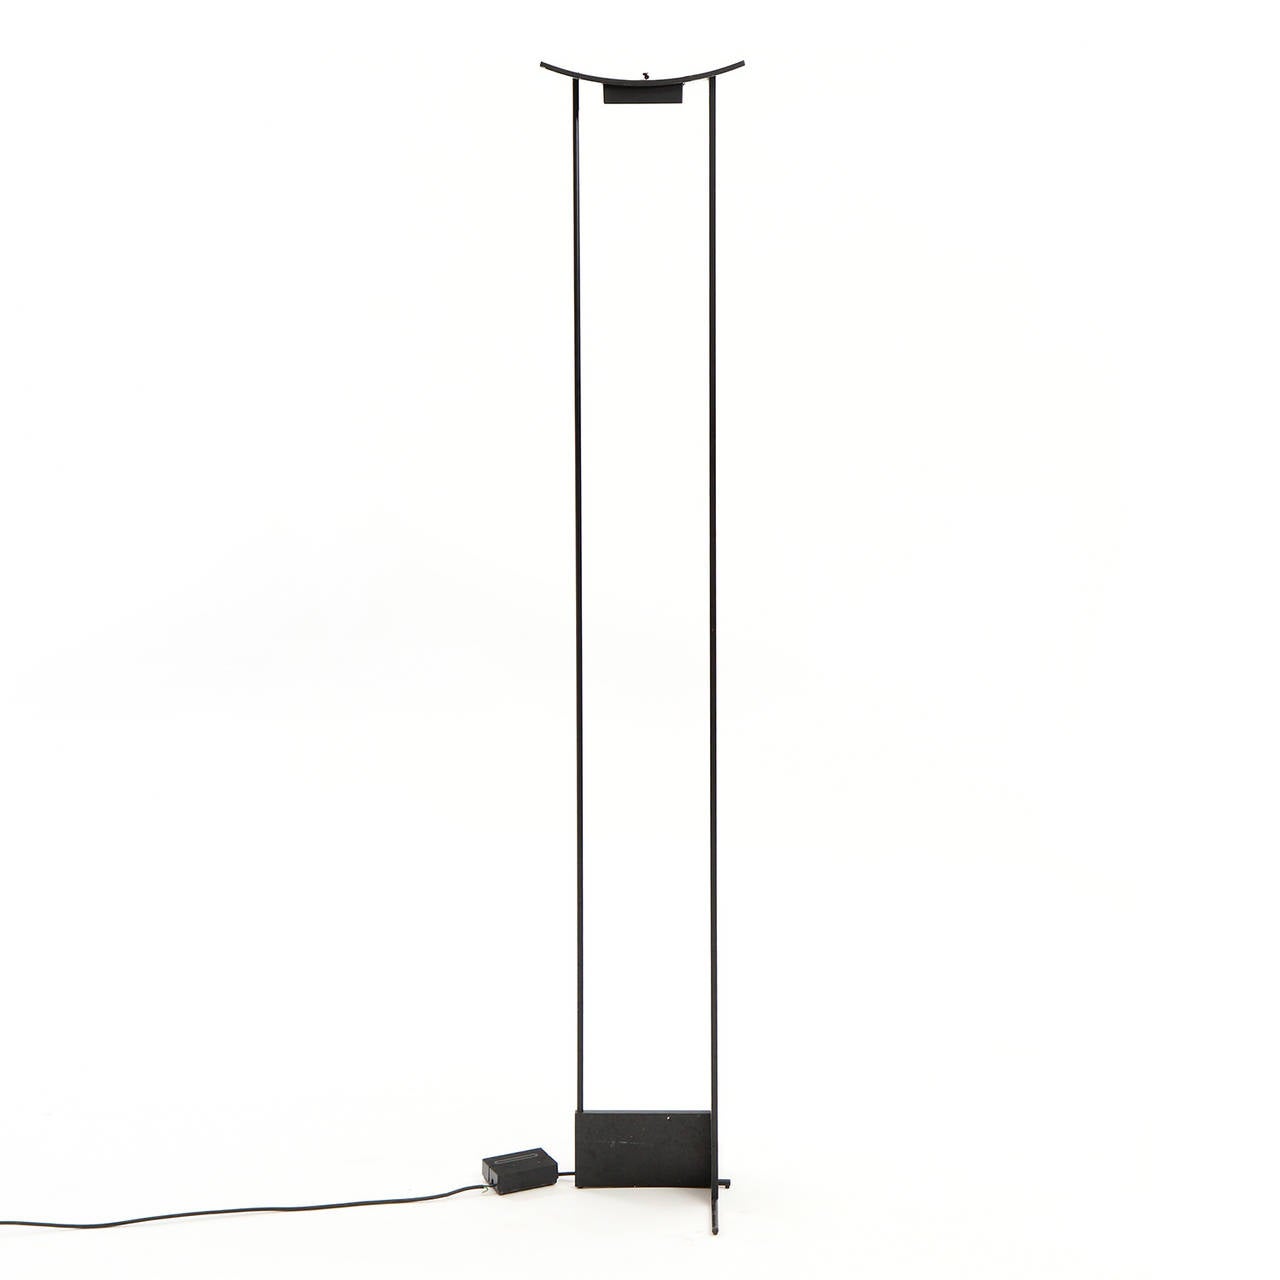 A minimalist, architectural and refined torchiere having a matte black rectilinear frame topped by an expressive subtly arching element housing the light source.